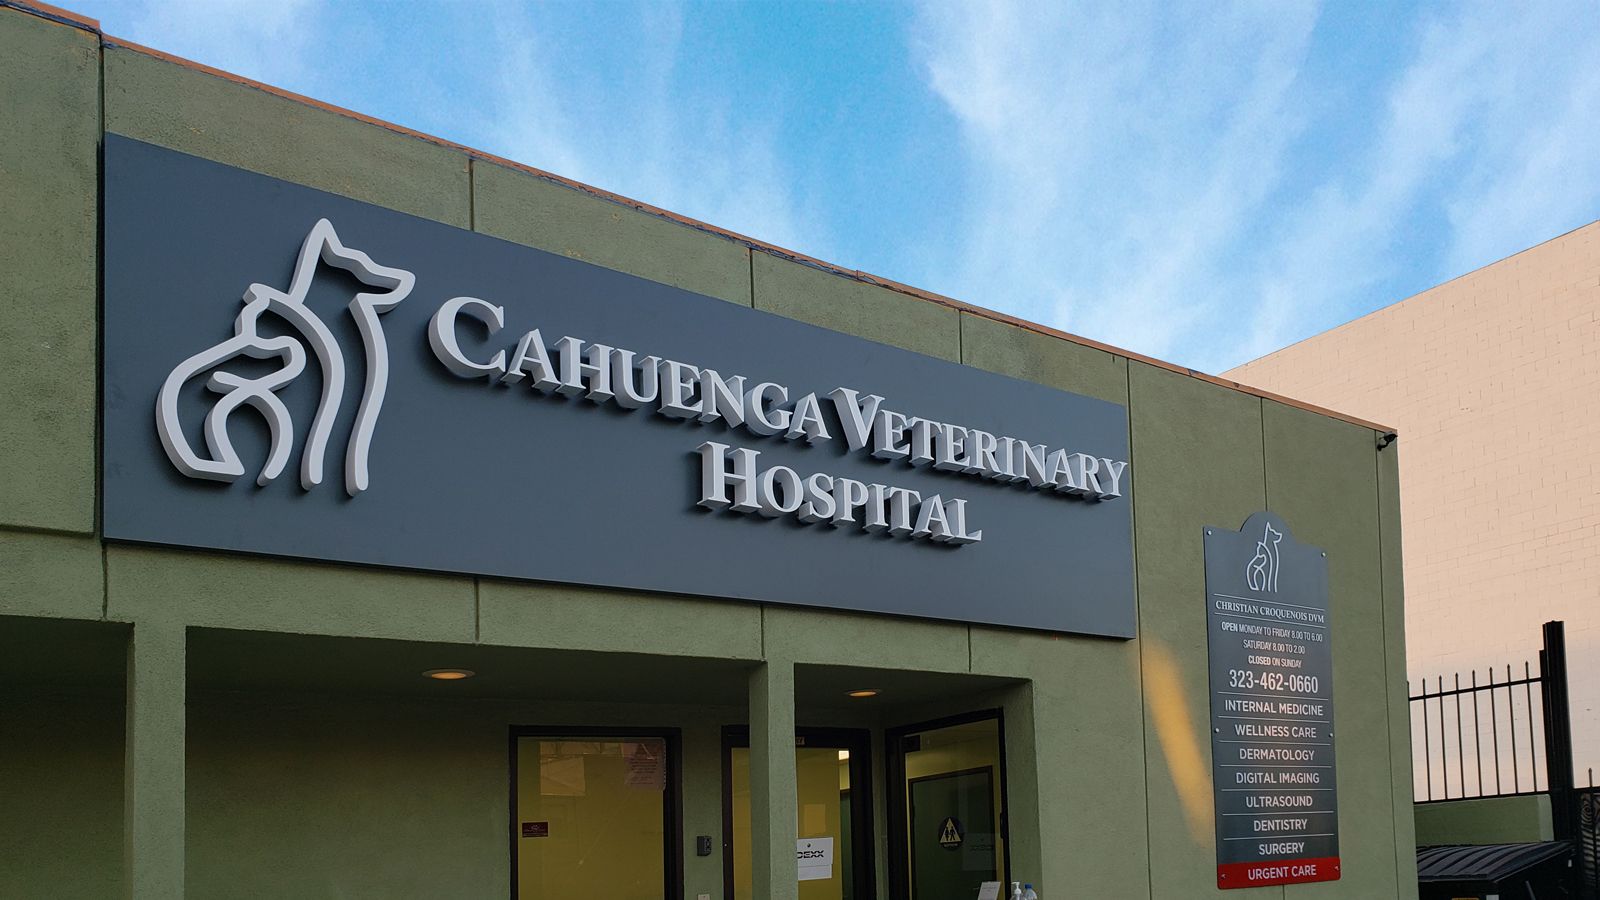 Cahuenga Veterinary Hospital 3d logo sign and brand name letters made of aluminum and acrylic